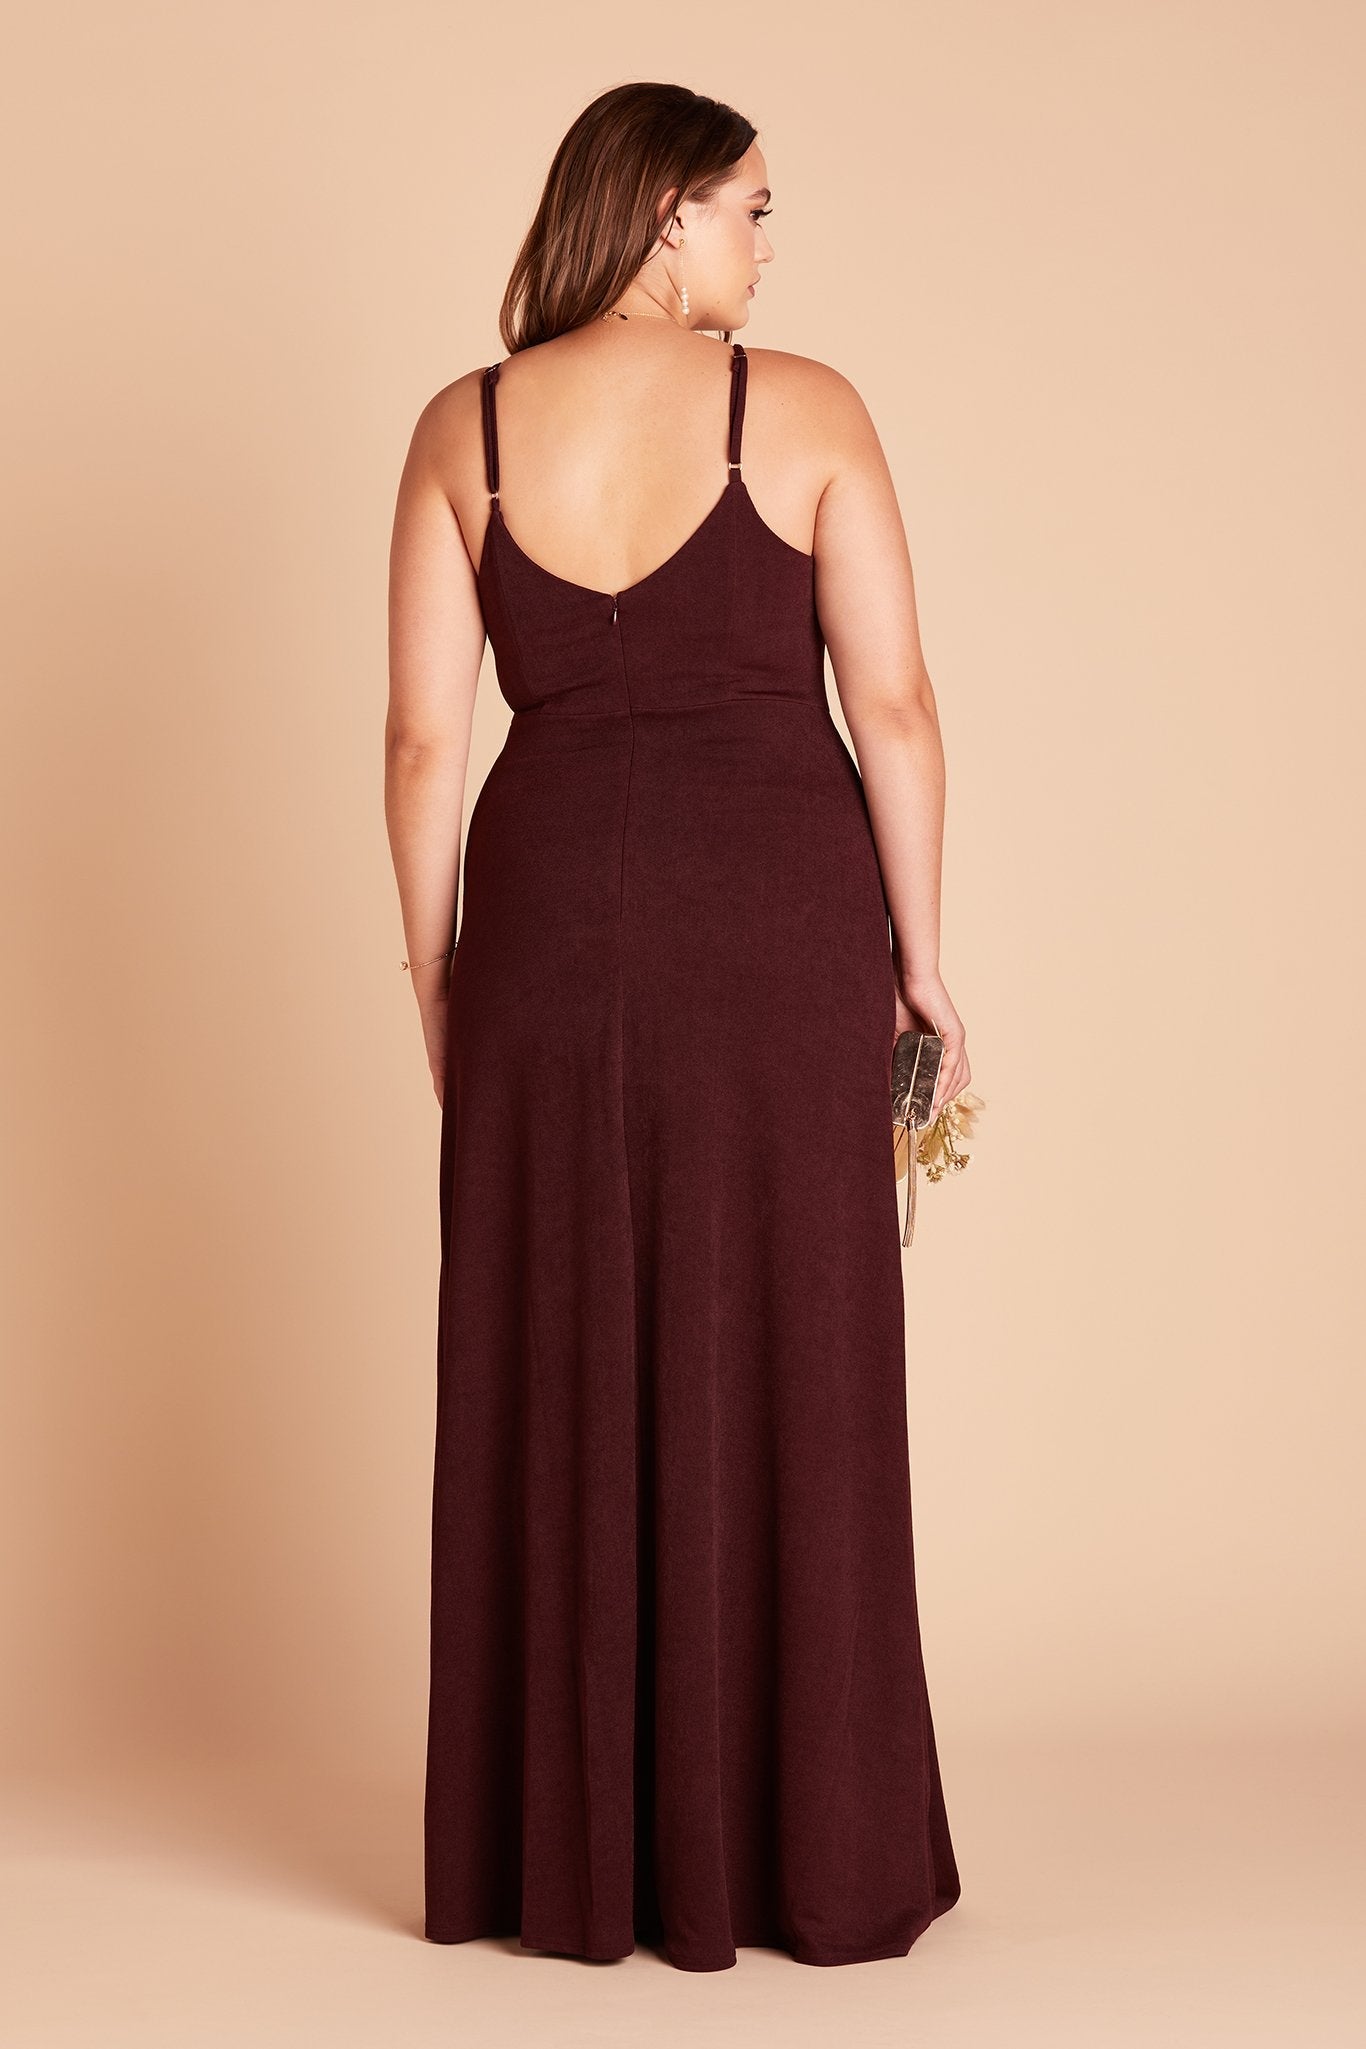 Jay plus size bridesmaid dress with slit in cabernet burgundy crepe by Birdy Grey, back view